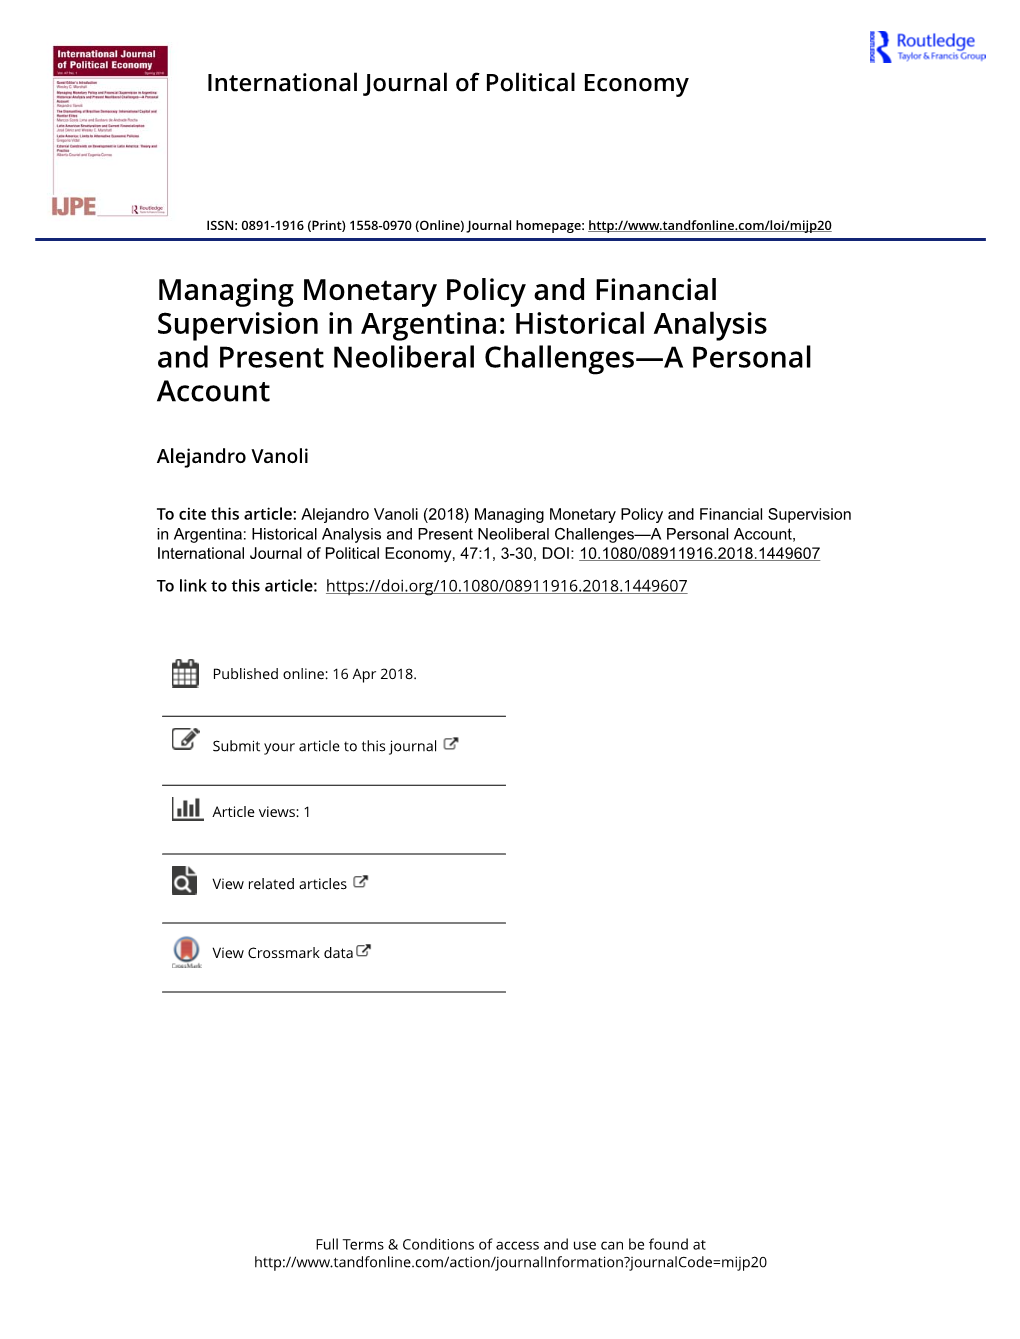 Managing Monetary Policy and Financial Supervision in Argentina: Historical Analysis and Present Neoliberal Challenges—A Personal Account